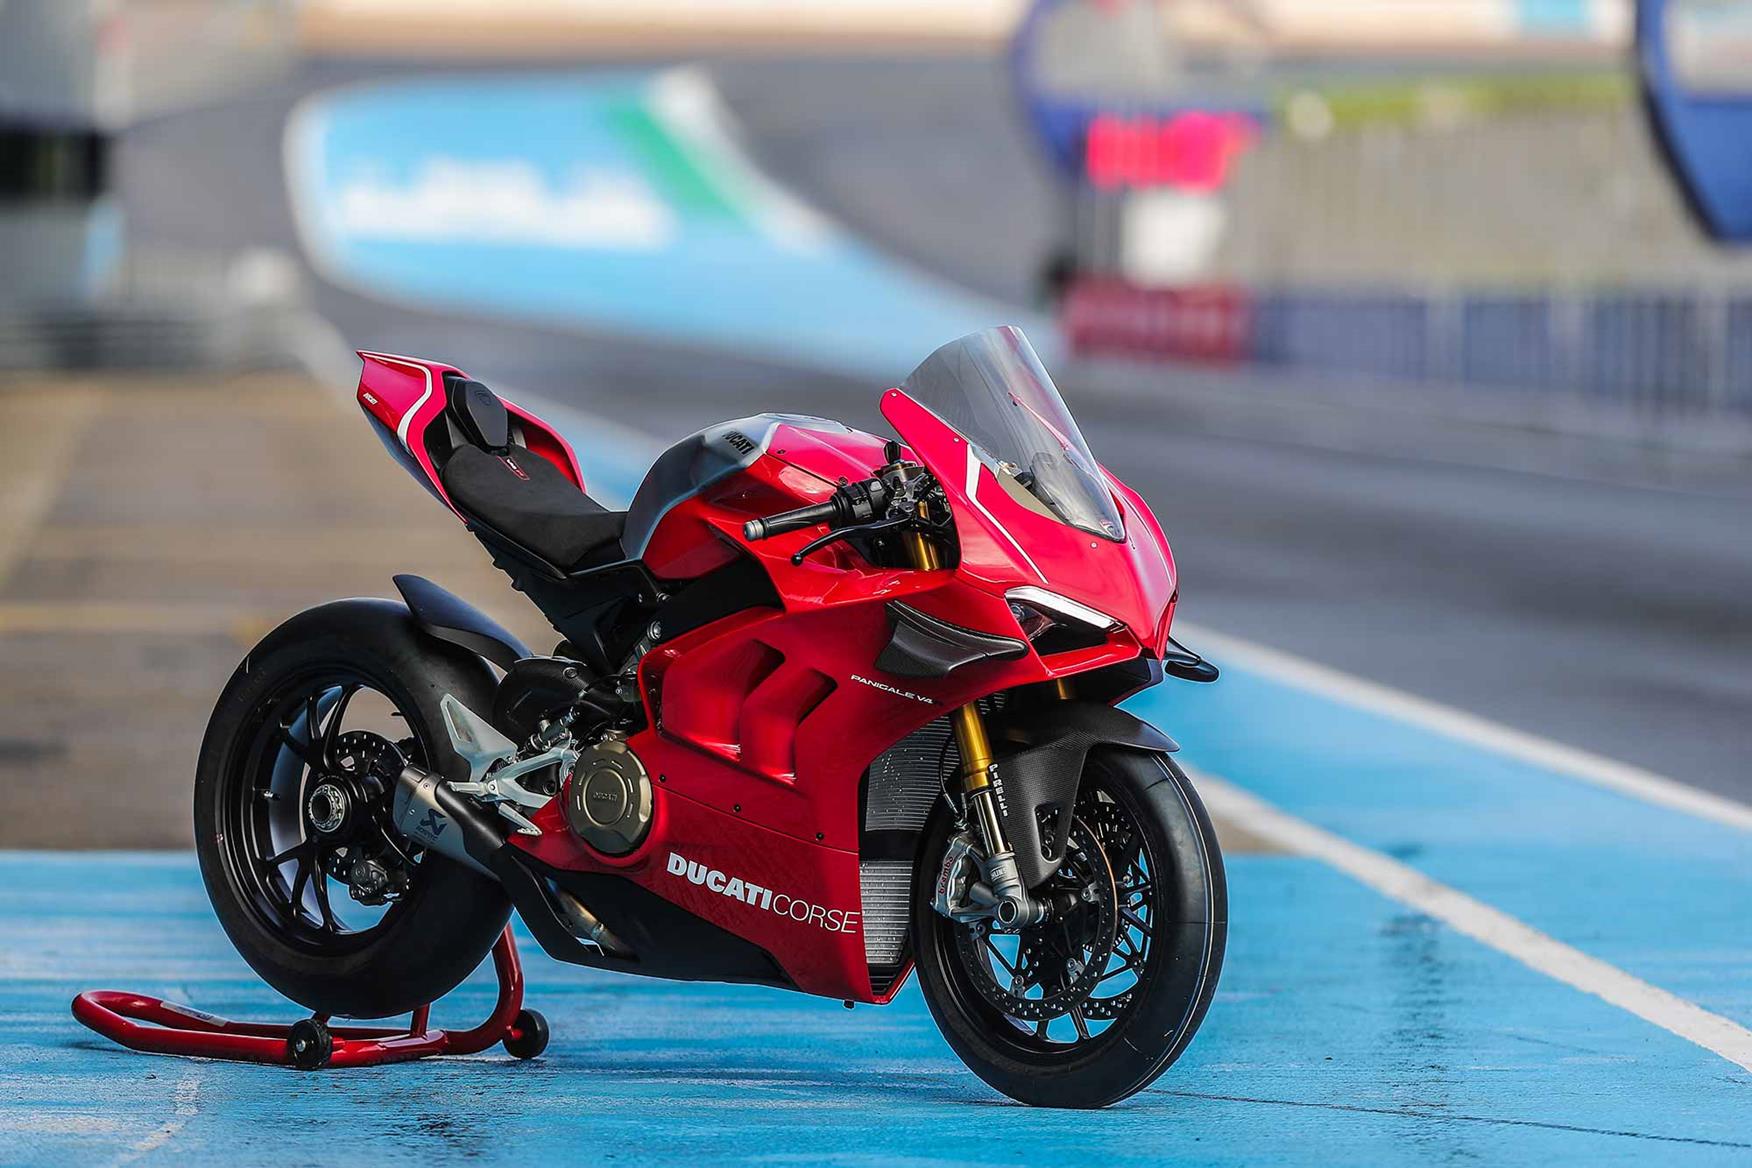 Ducati Panigale V4r 2019 On Review Mcn